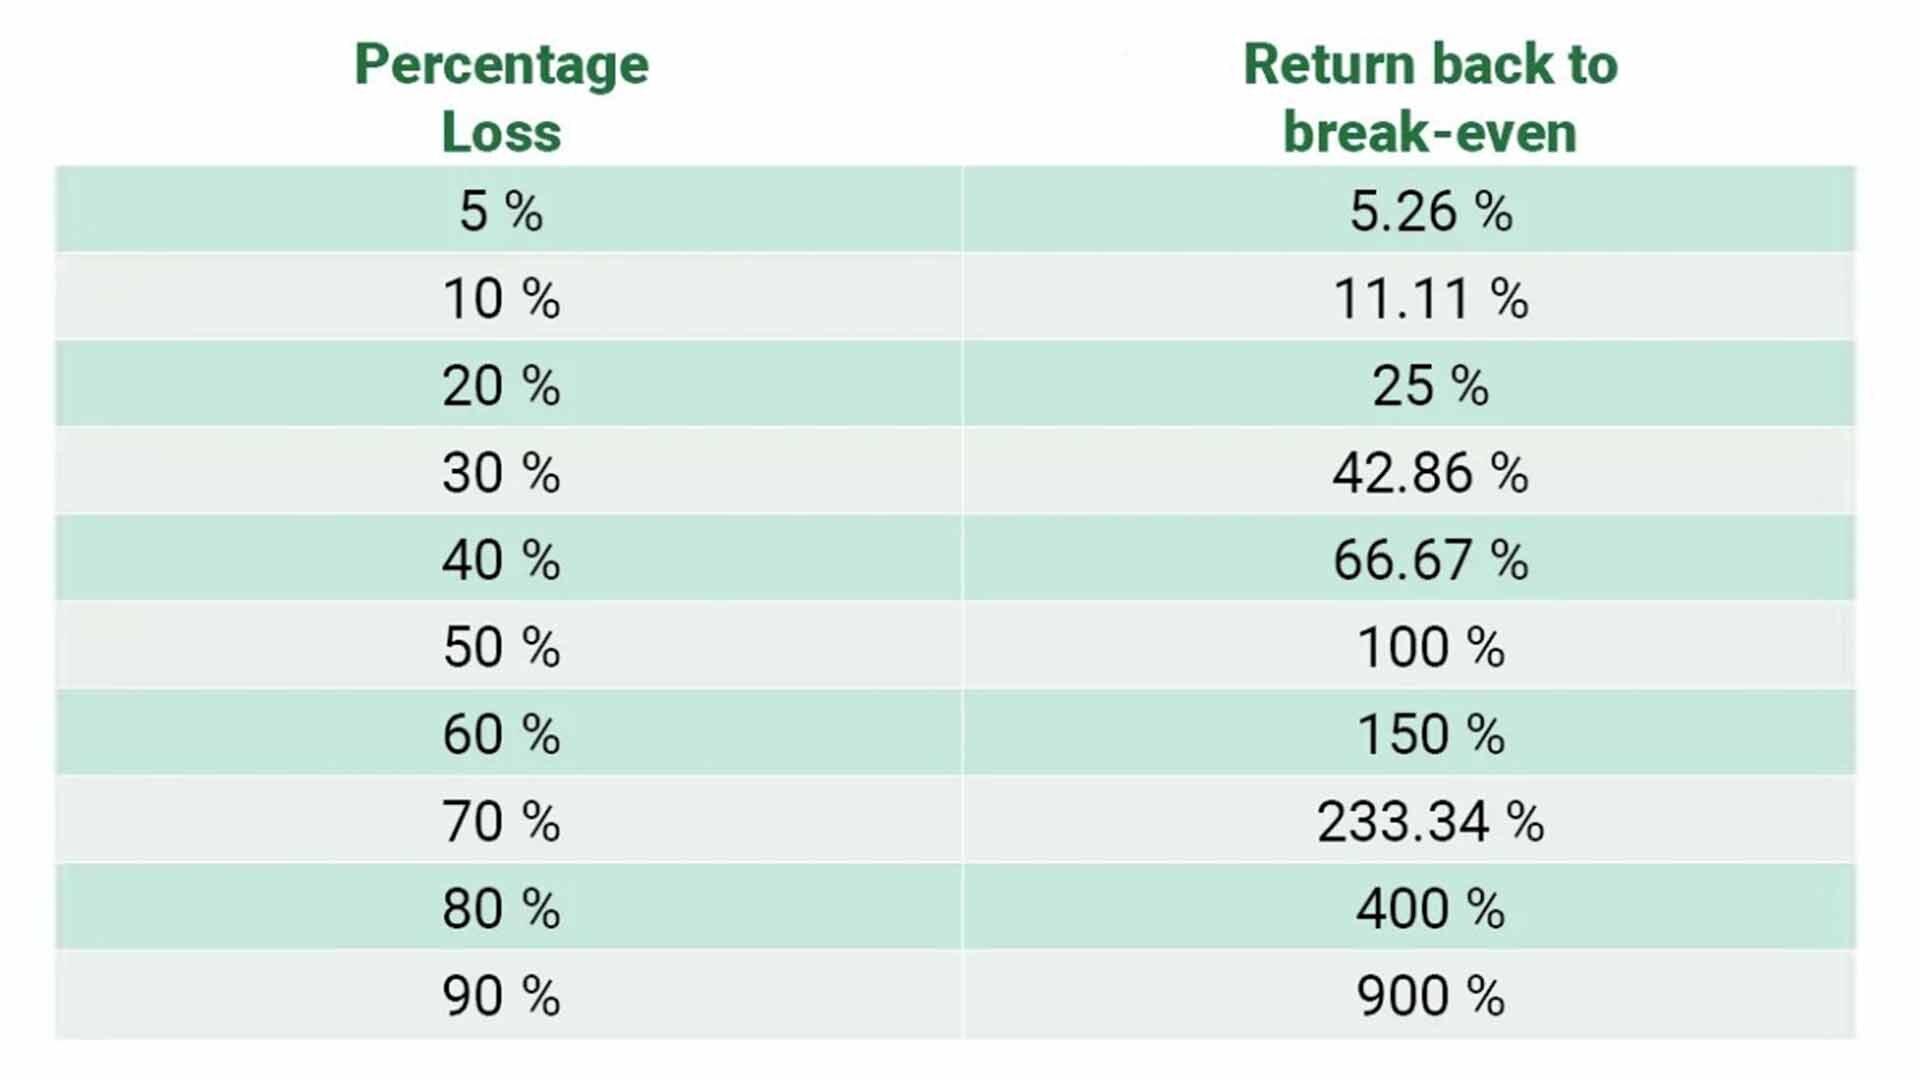 Percentage trading losses with equivalent percentage gain necessary to bring your portfolio back to break-even. Source: Medium.